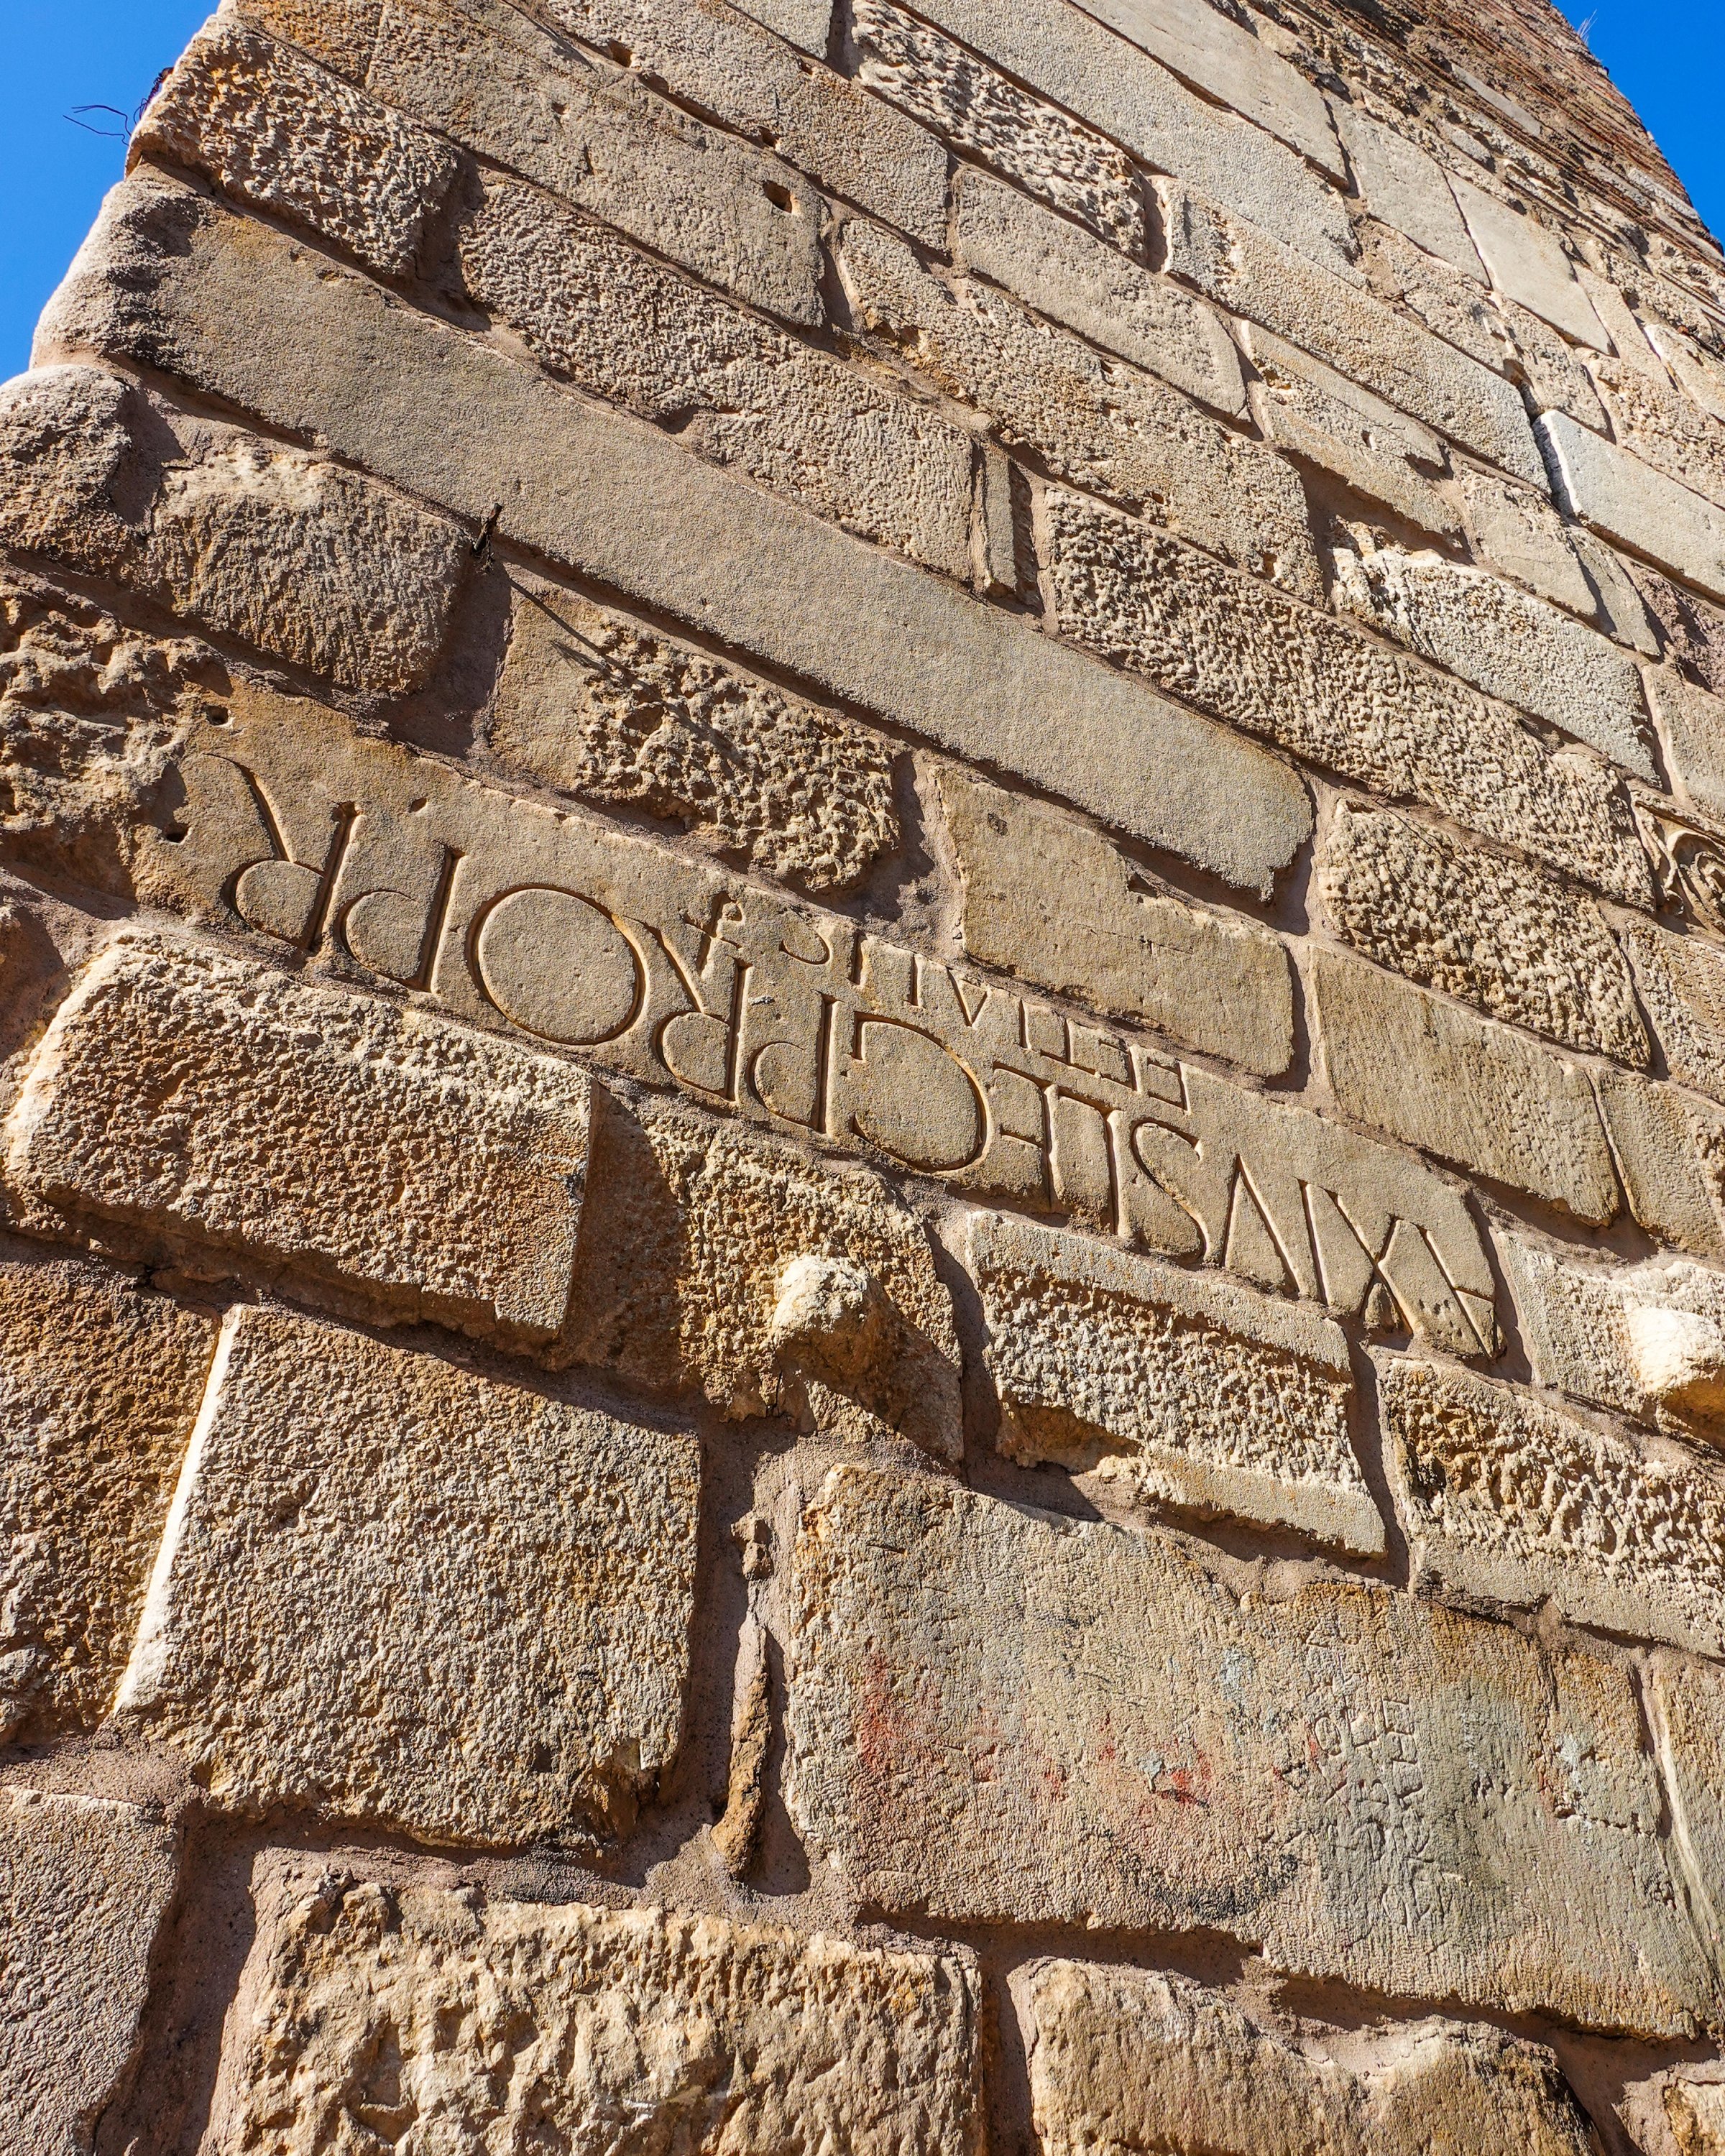 An ancient stone block with Latin inscriptions on the citadel walls. (Photo by Argun Konuk)